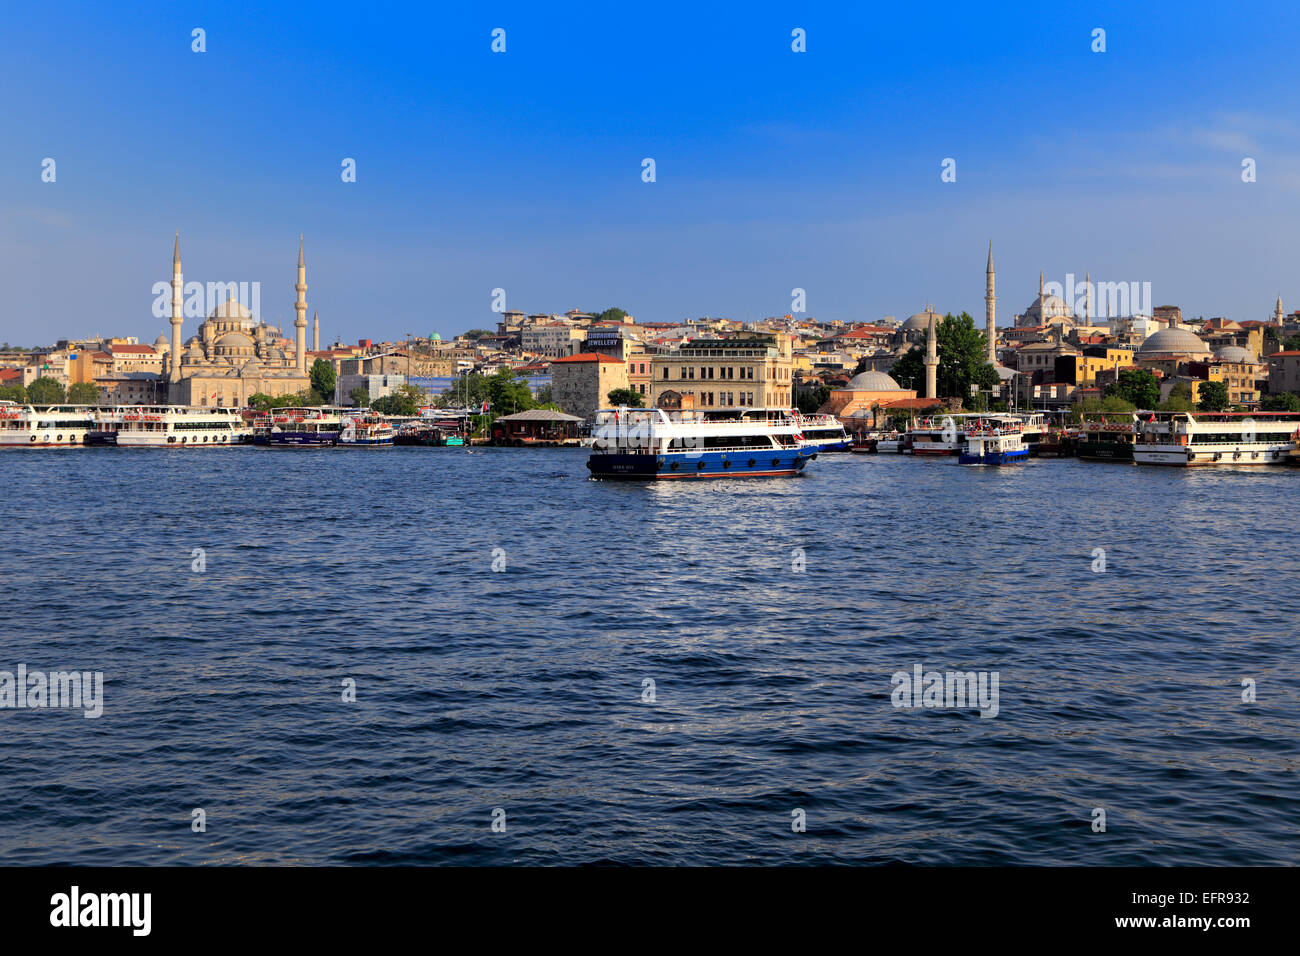 View of the shores of Golden Horn from the ferry, Bosphorus, Istanbul, Turkey Stock Photo